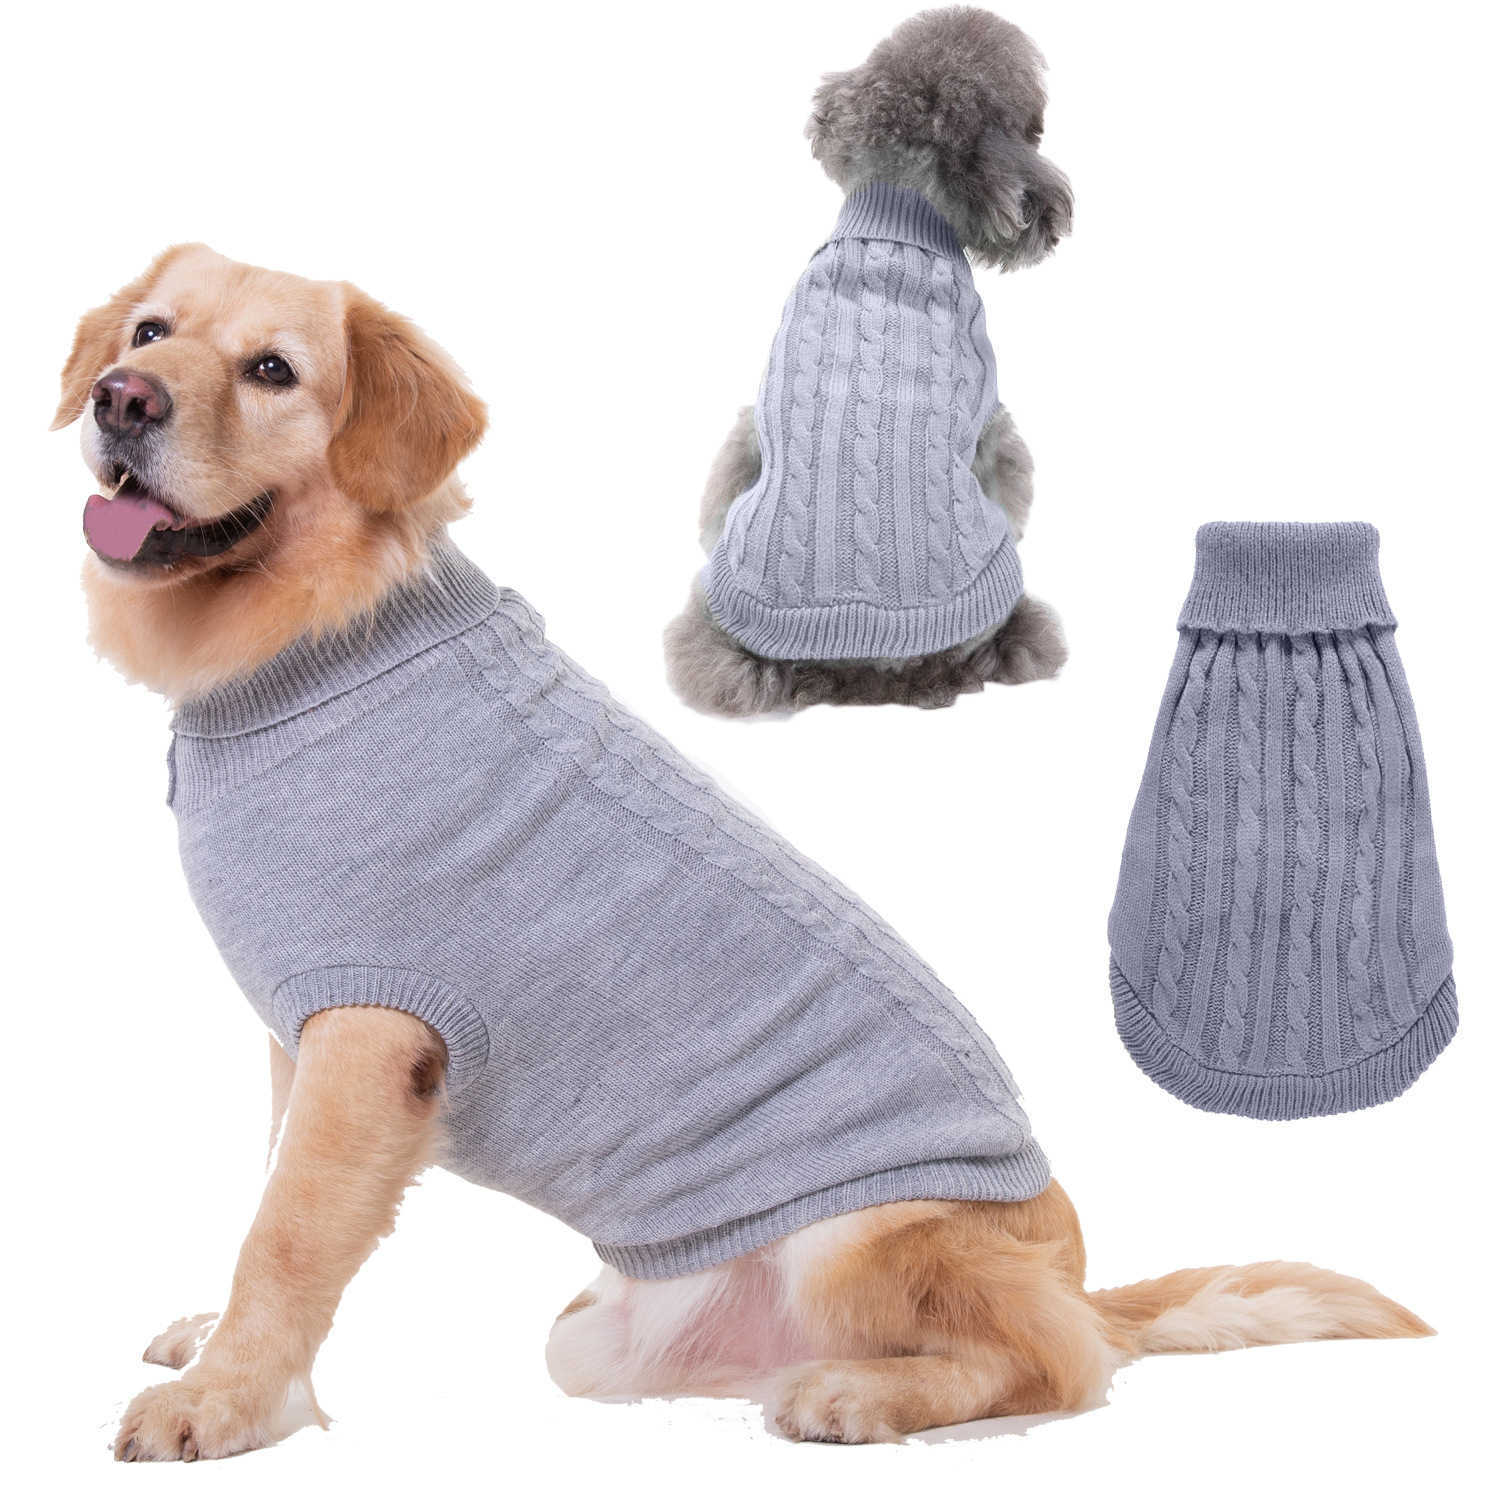 Dog Apparel Pet supplies dog clothing solid color twisted high collar pet sweater autumn and winter